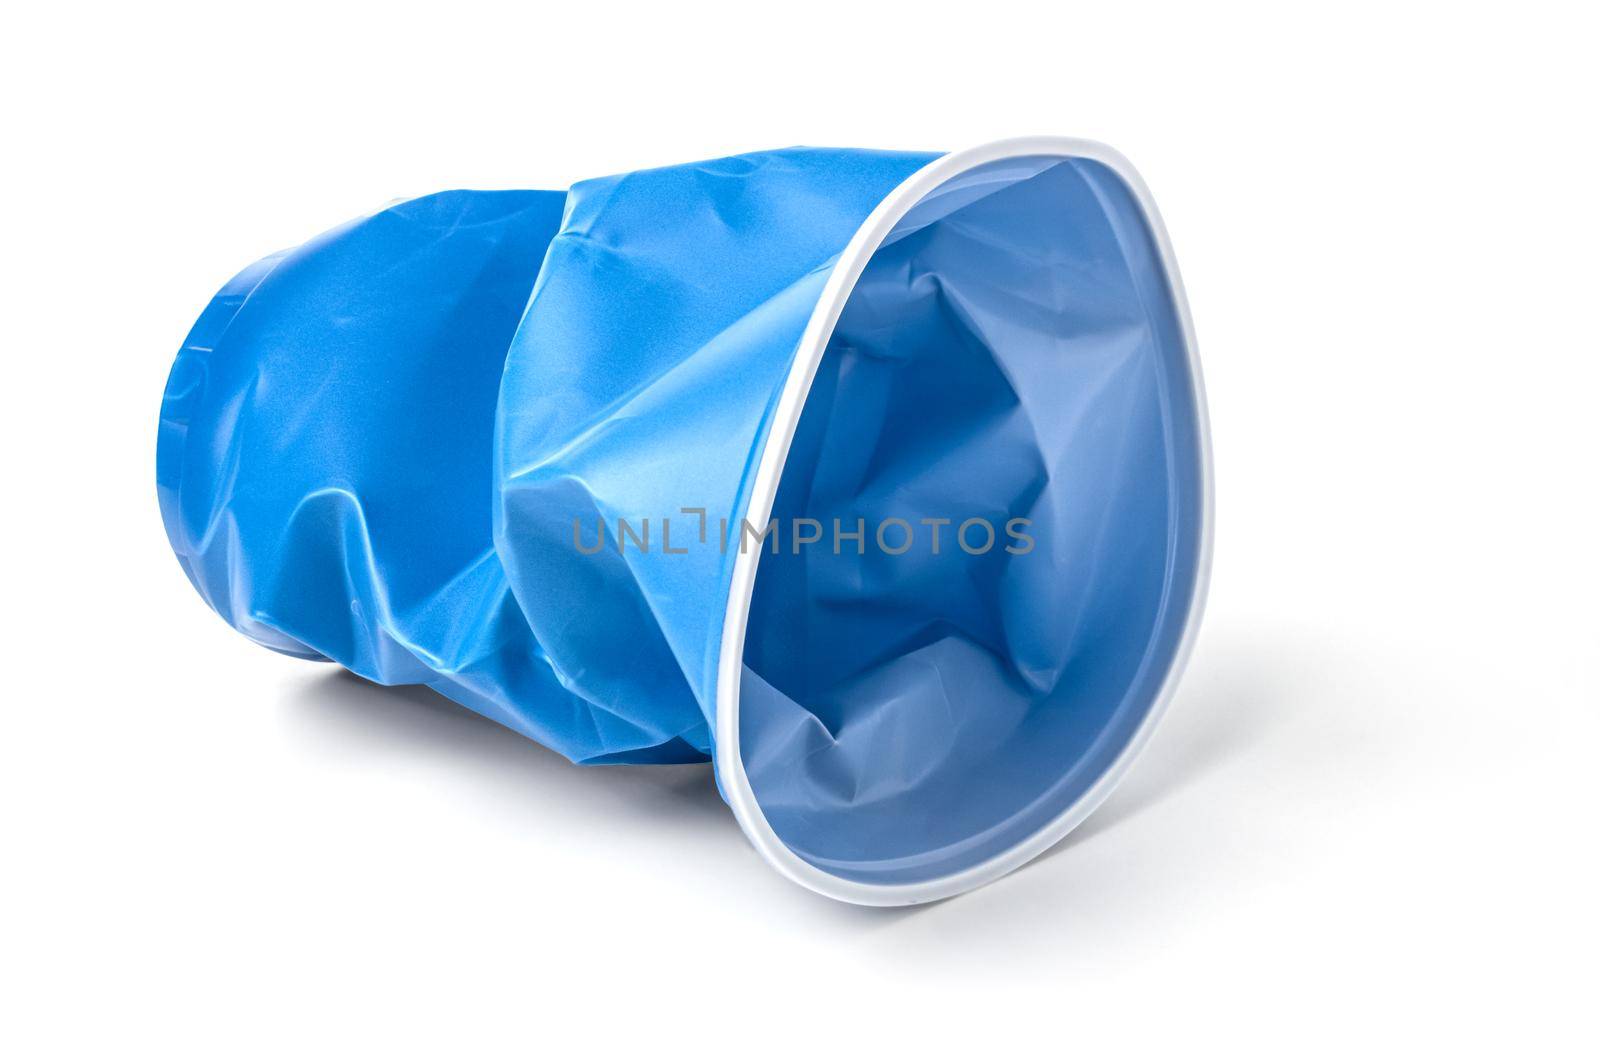 crumpled blue plastic cup, insulated on a white background